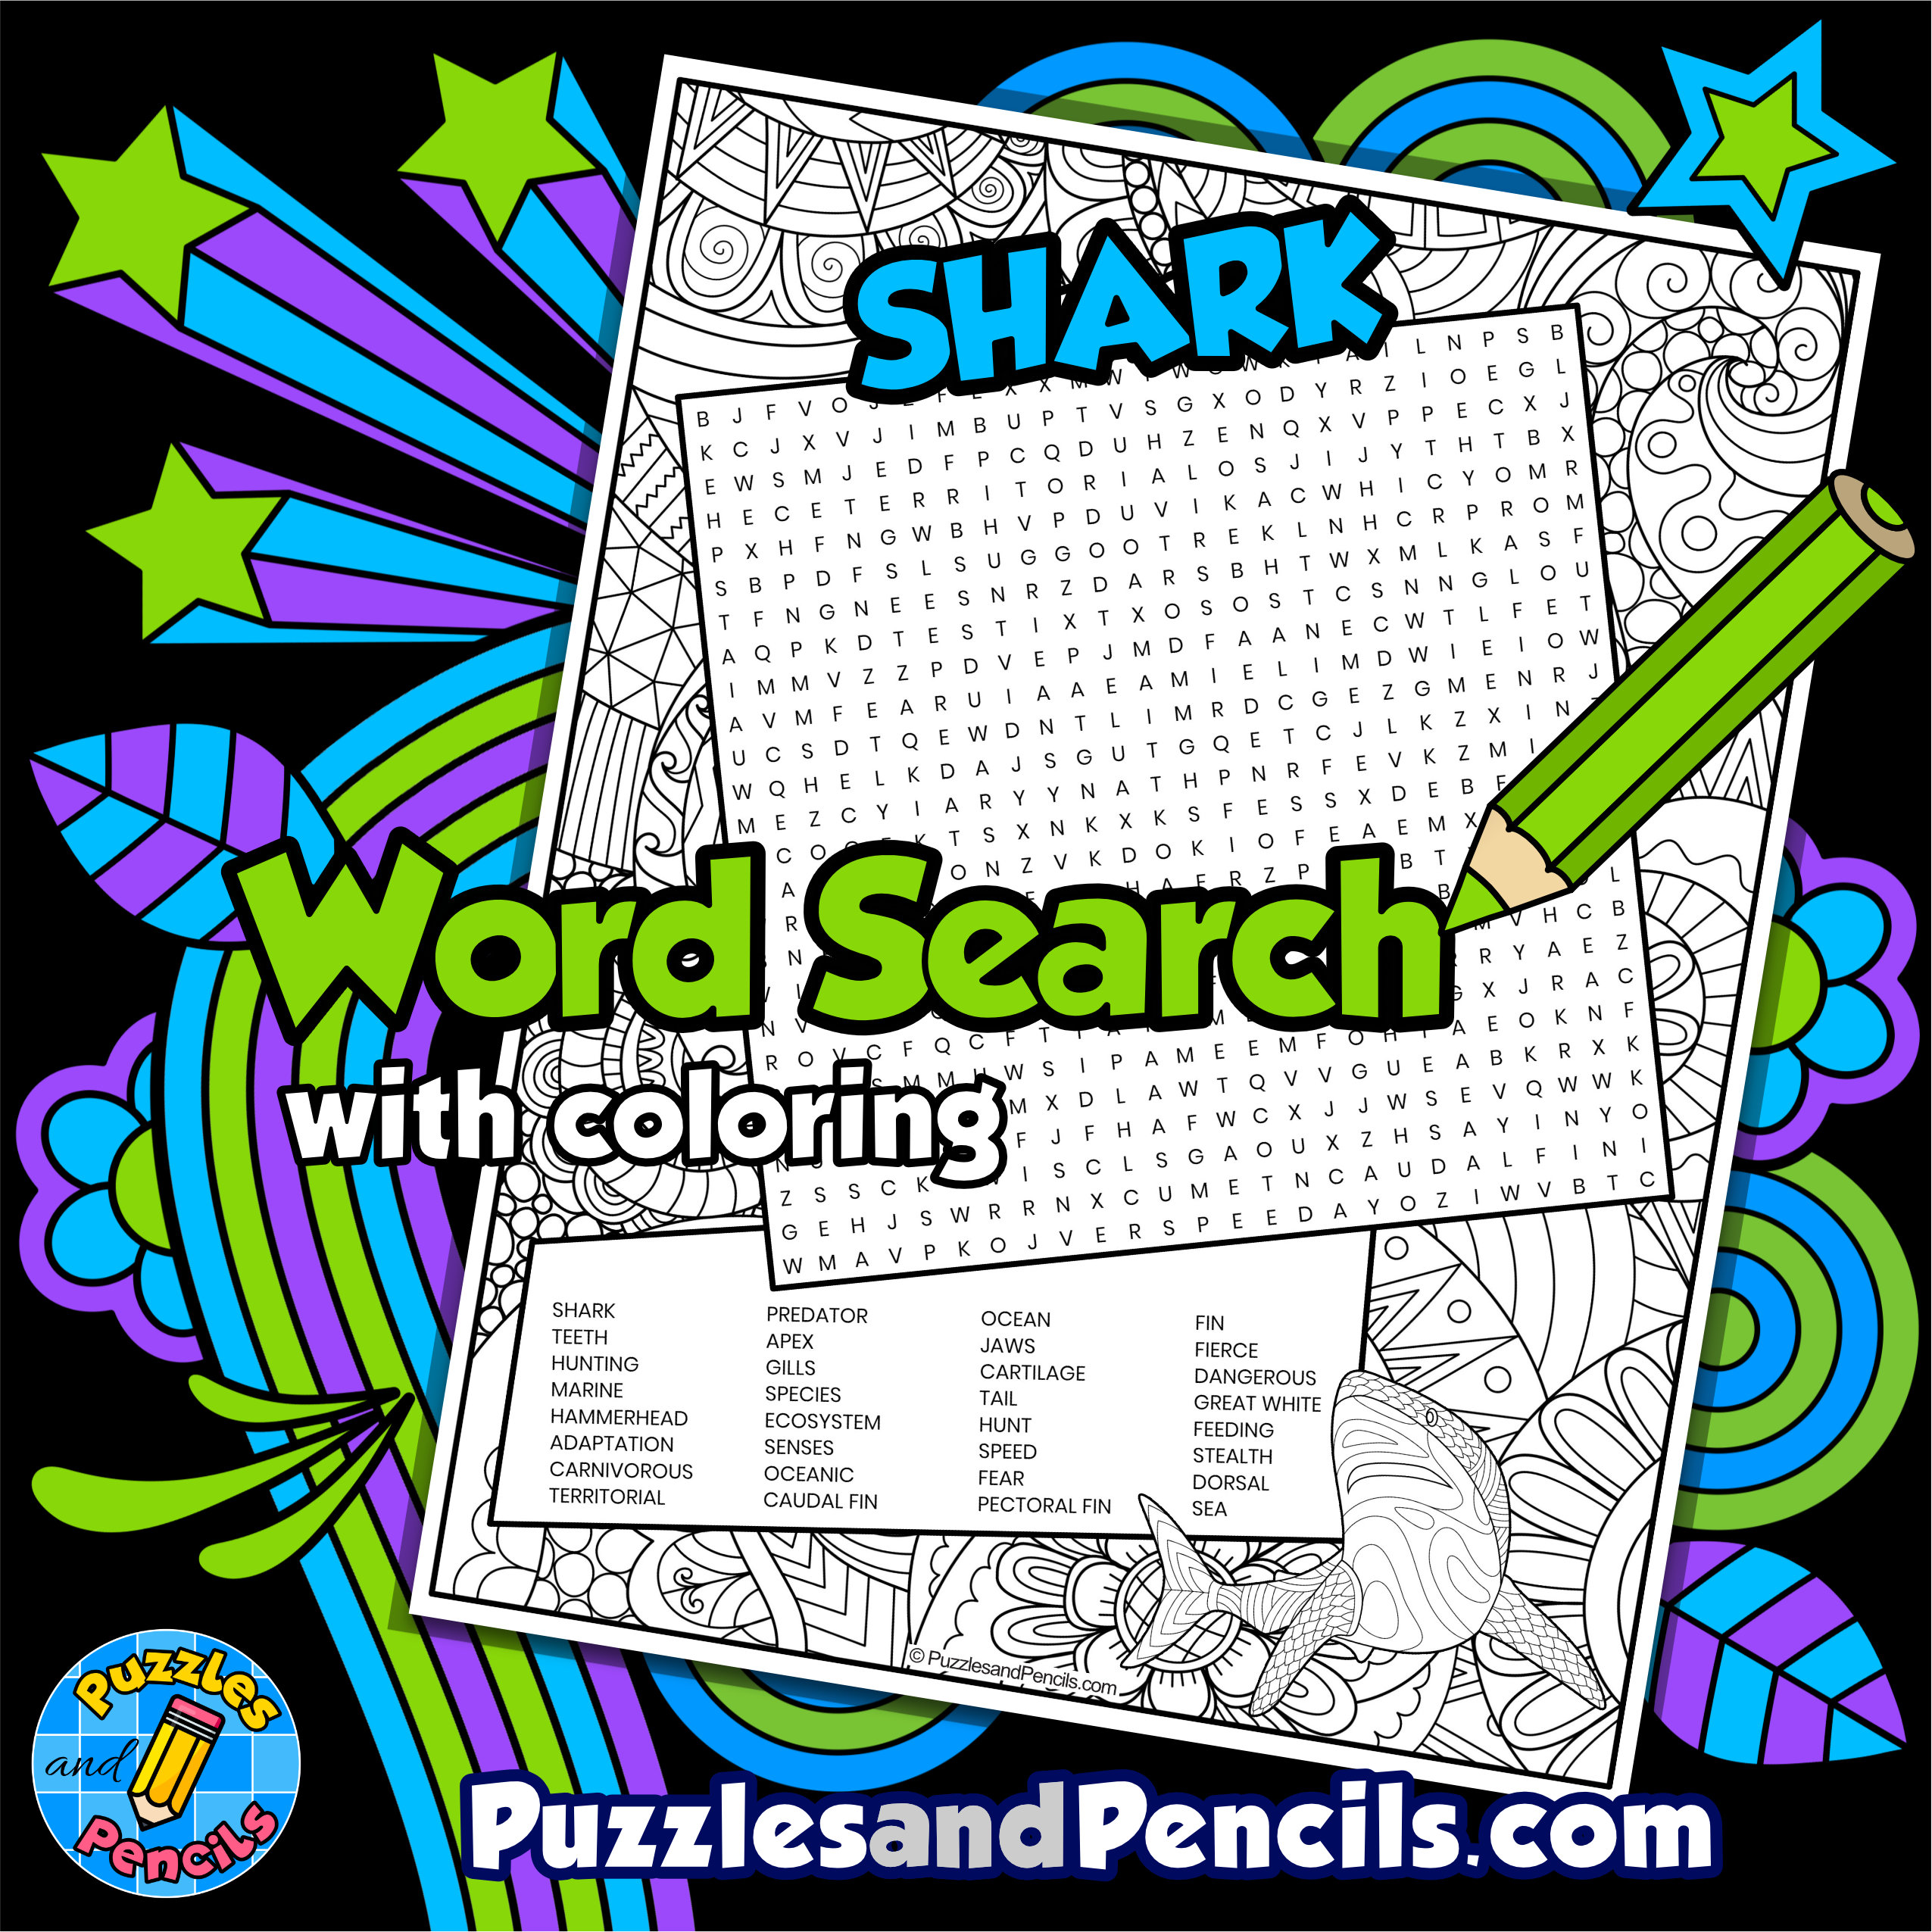 Shark word search puzzle activity with coloring wordsearch made by teachers